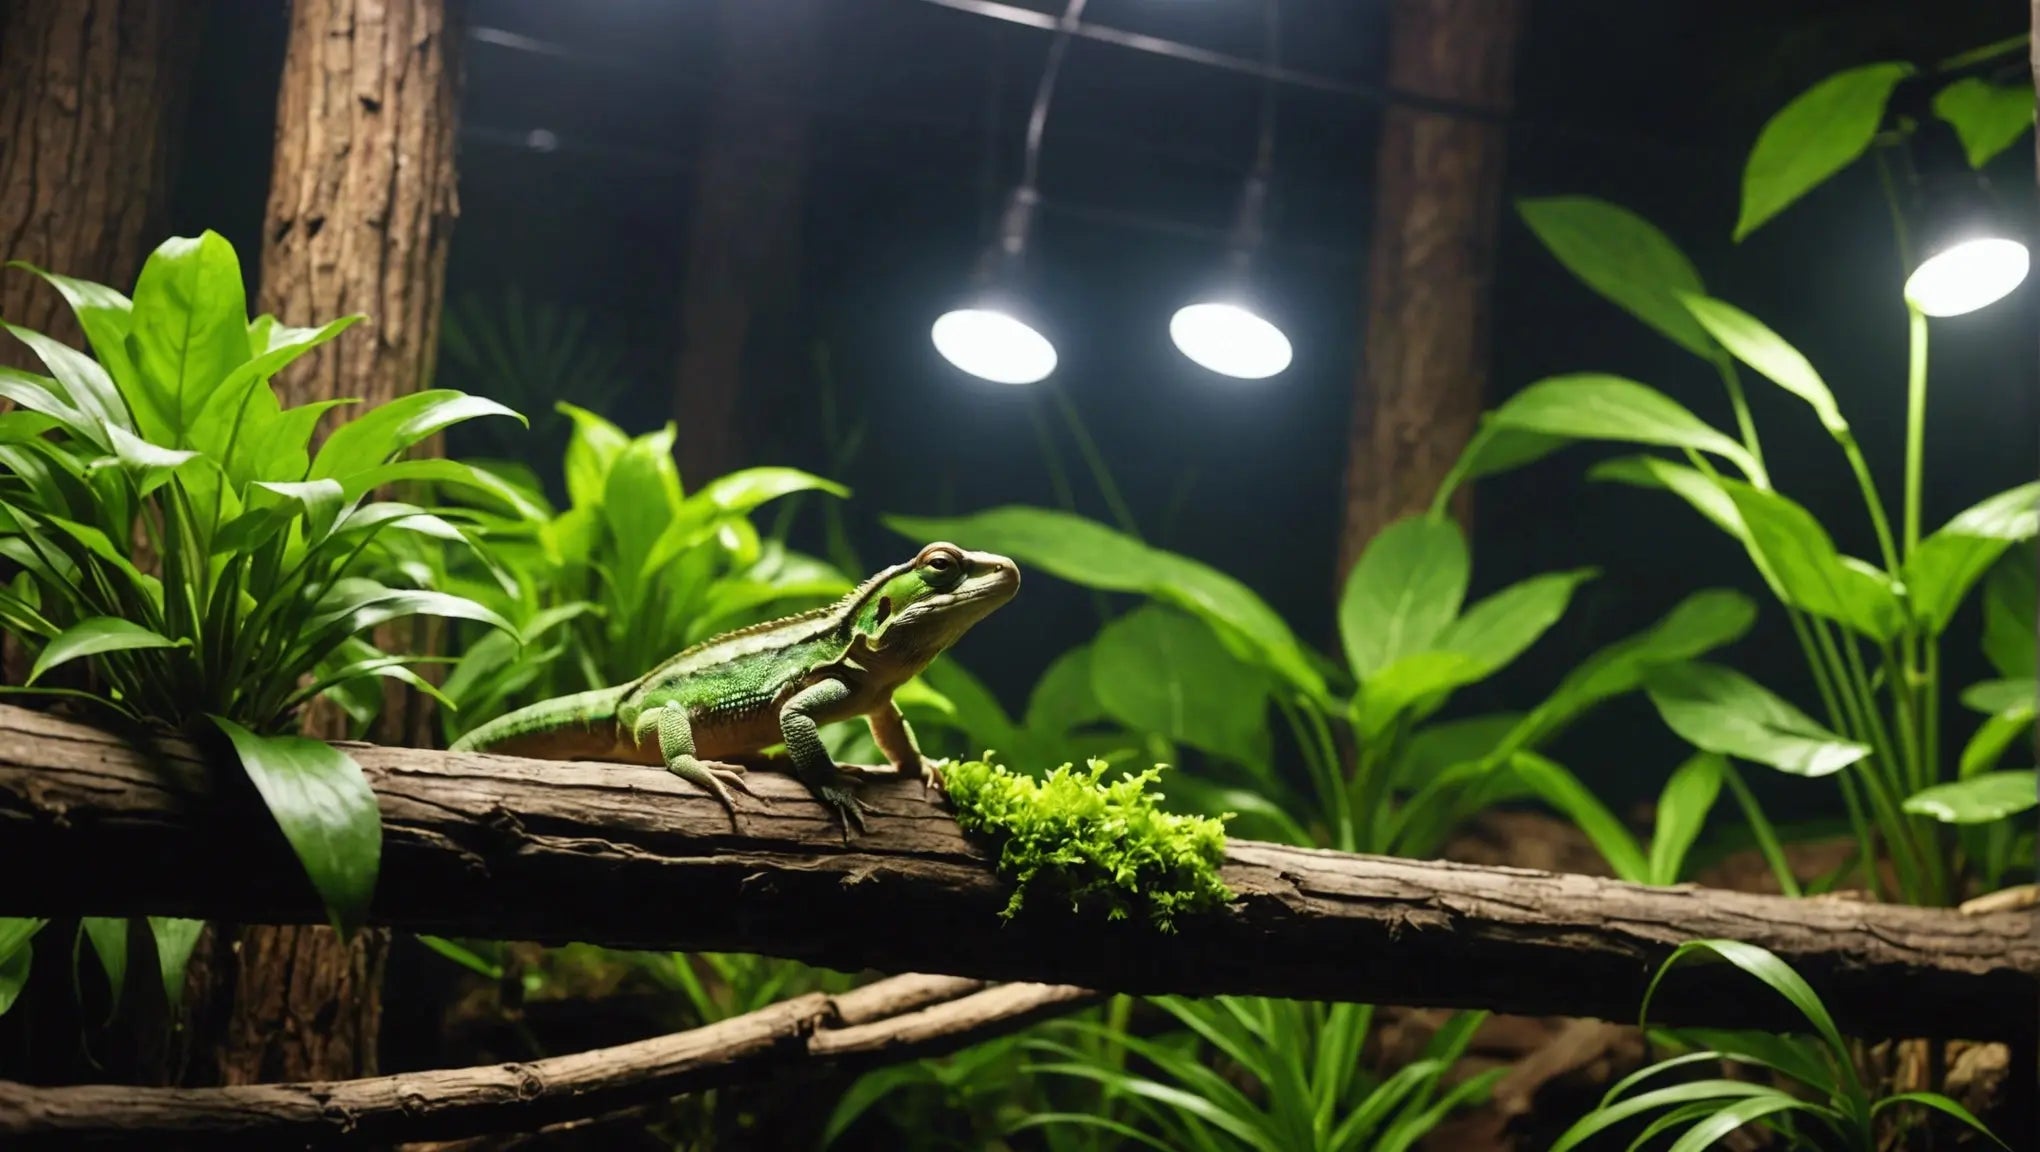 The Ultimate Guide to Choosing Lights for Your Reptile Habitat